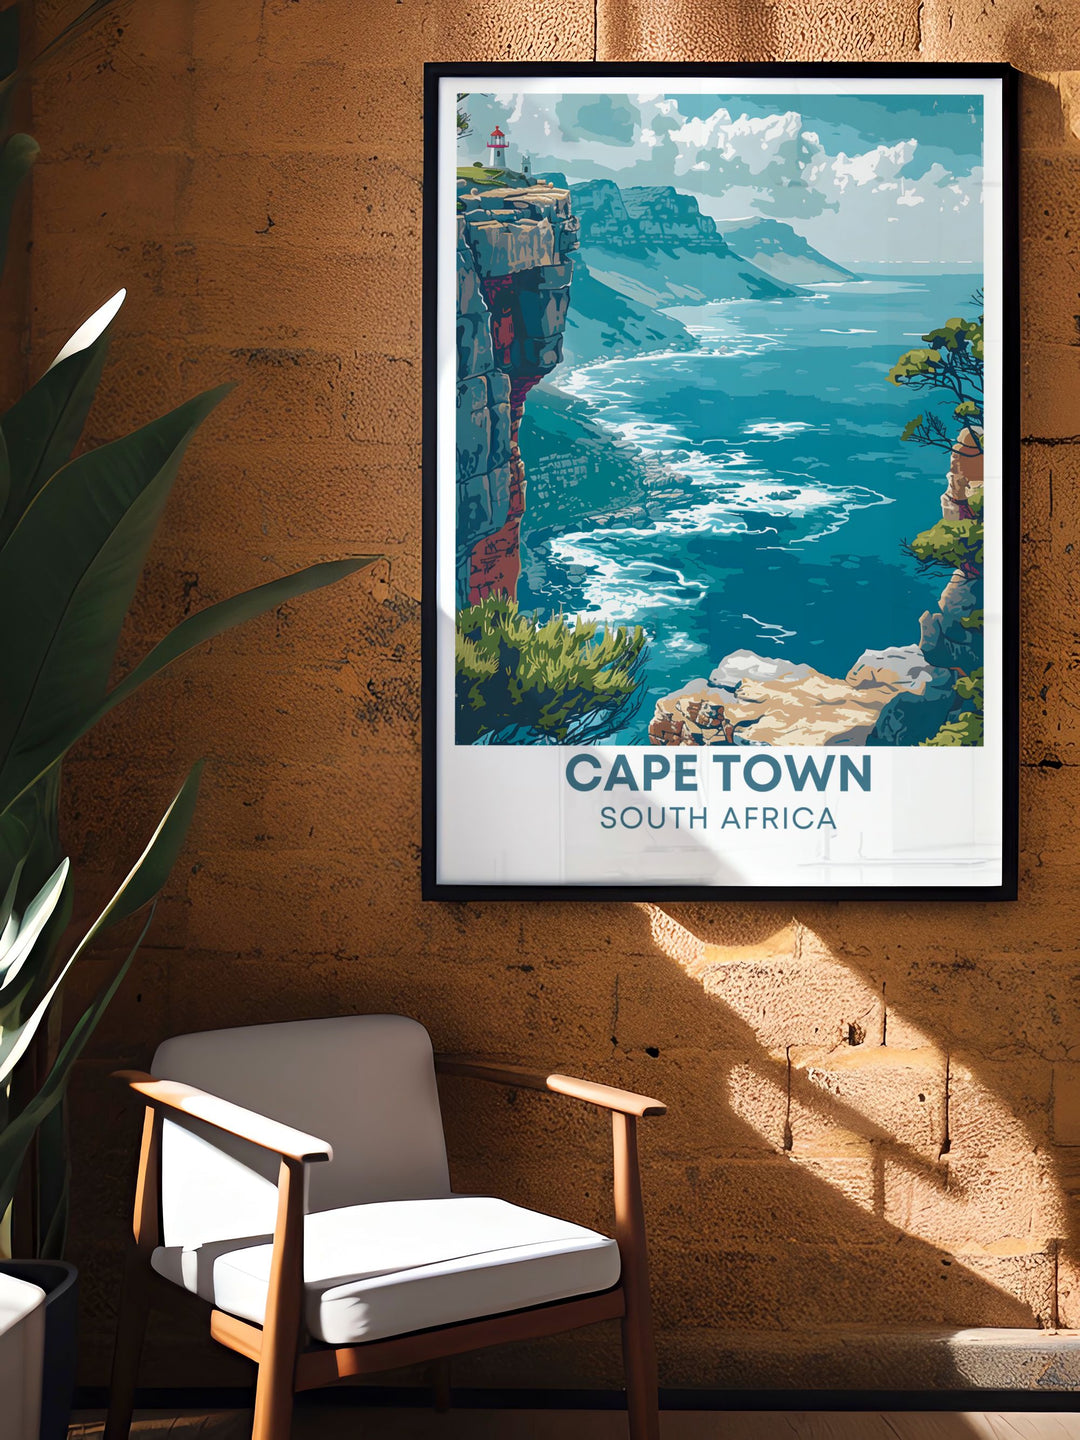 This travel poster captures the iconic Table Mountain and Cape Point in Cape Town, perfect for adding a touch of South Africas natural splendor to your home decor.